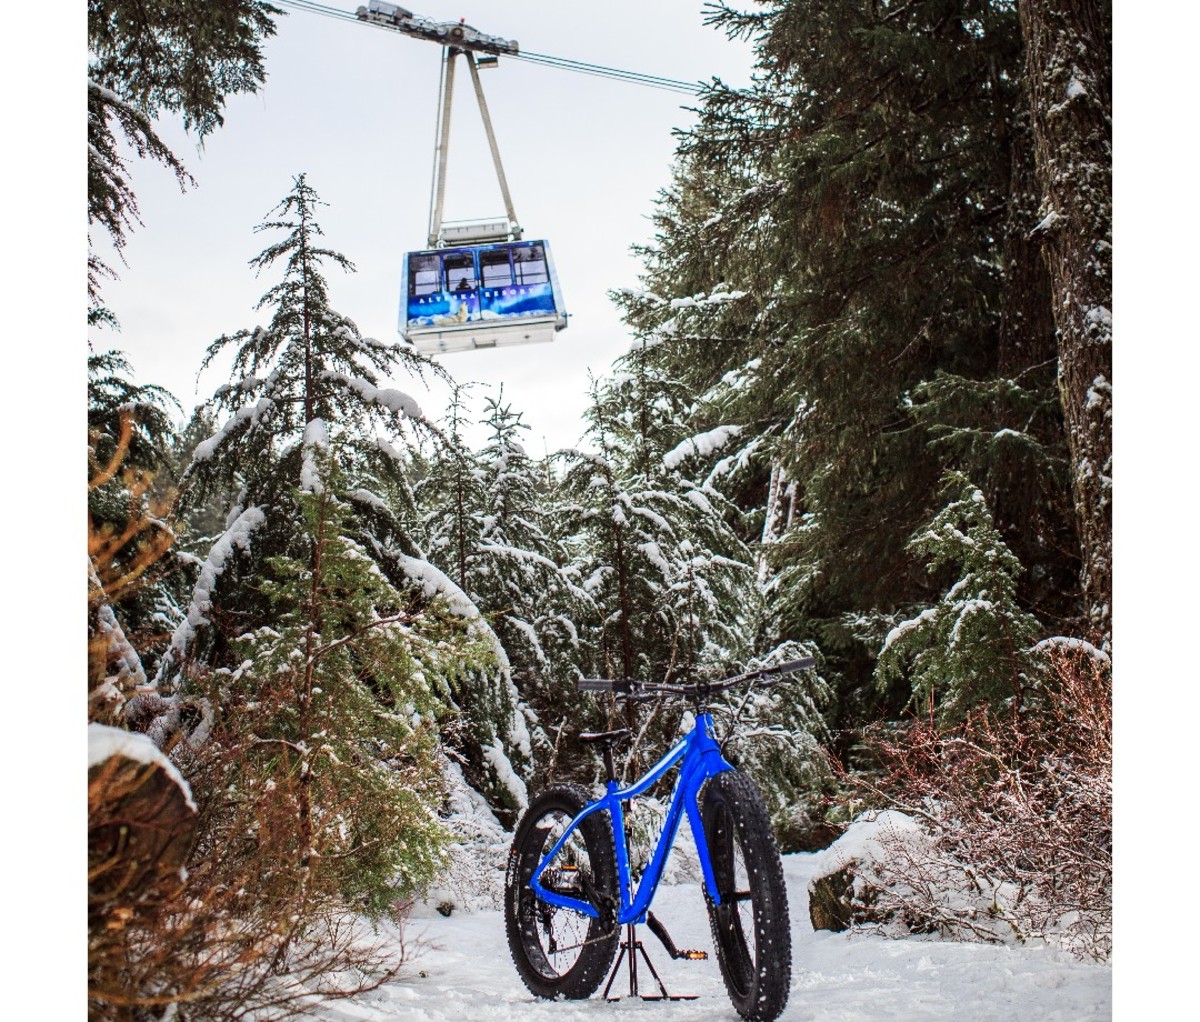 Mountain bike standing in a snowy forested area with a ski tram in the background